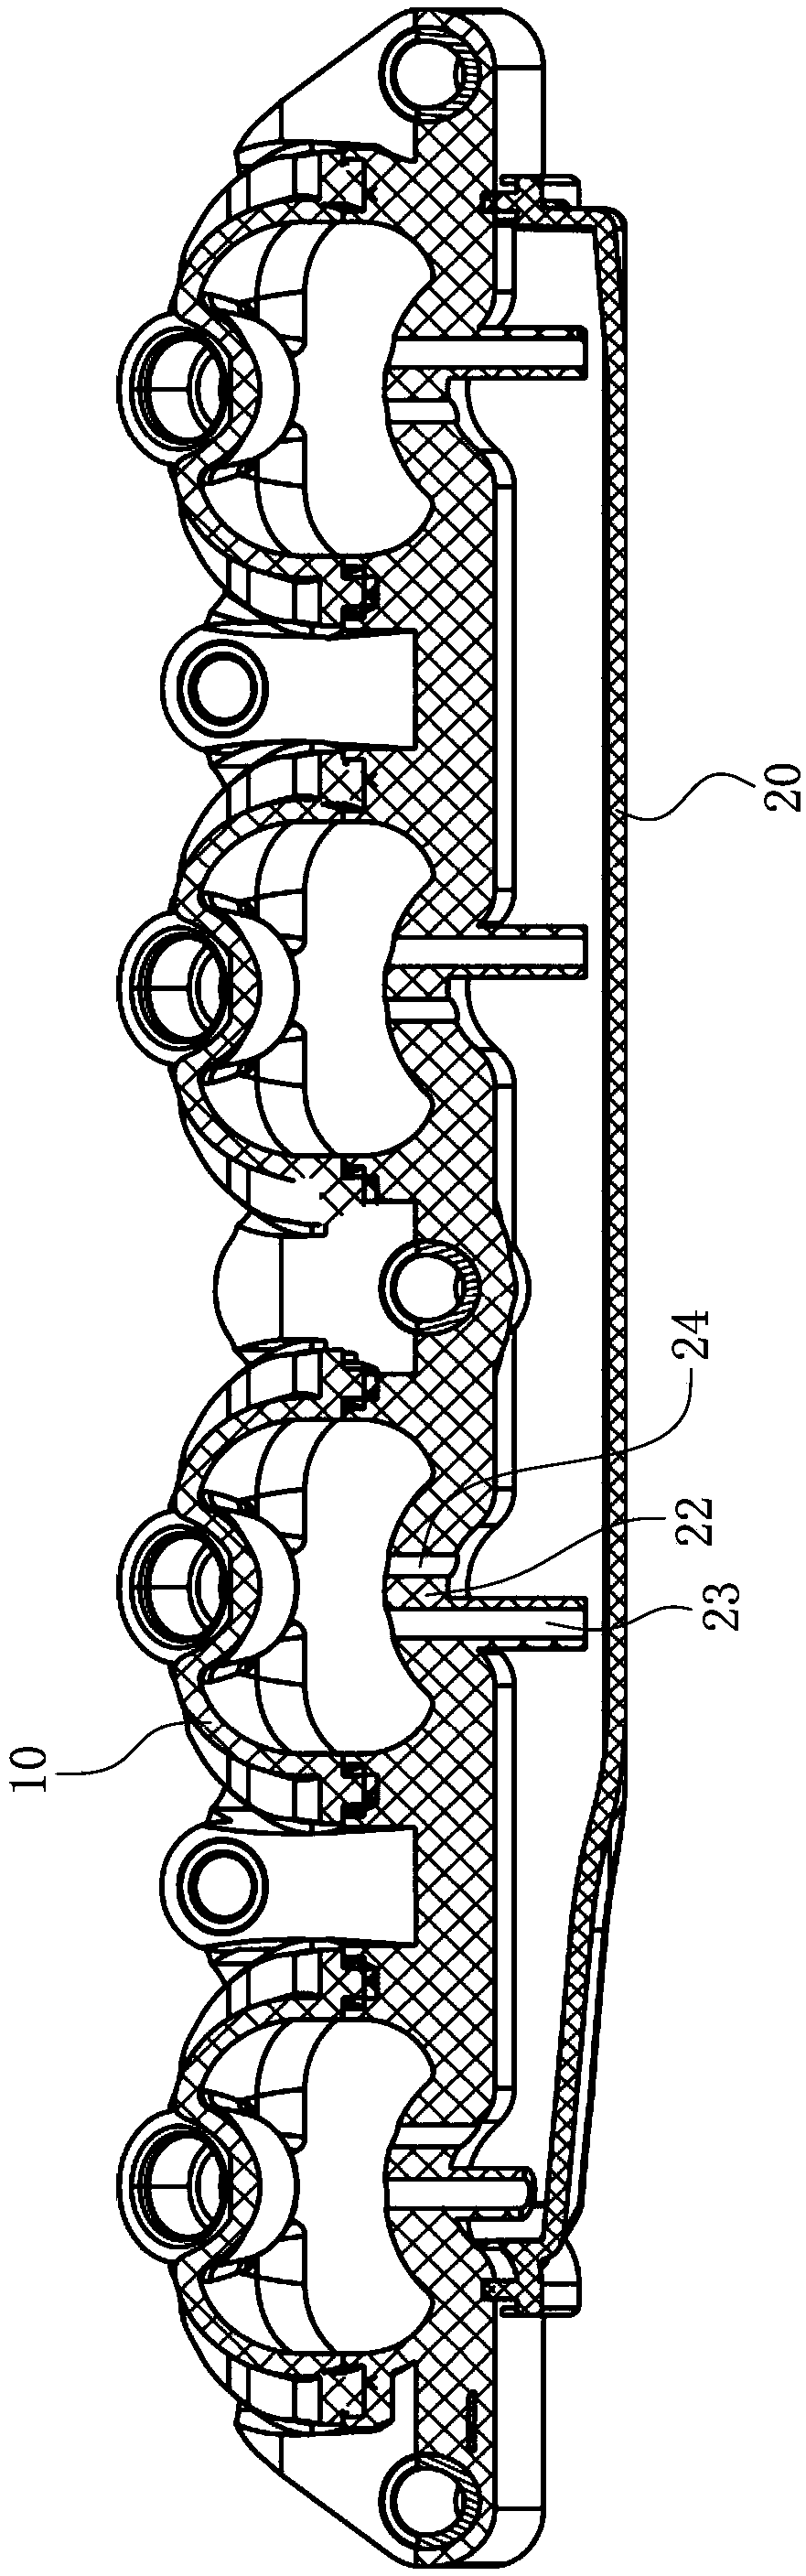 Intake manifold that directs crankcase ventilation gases